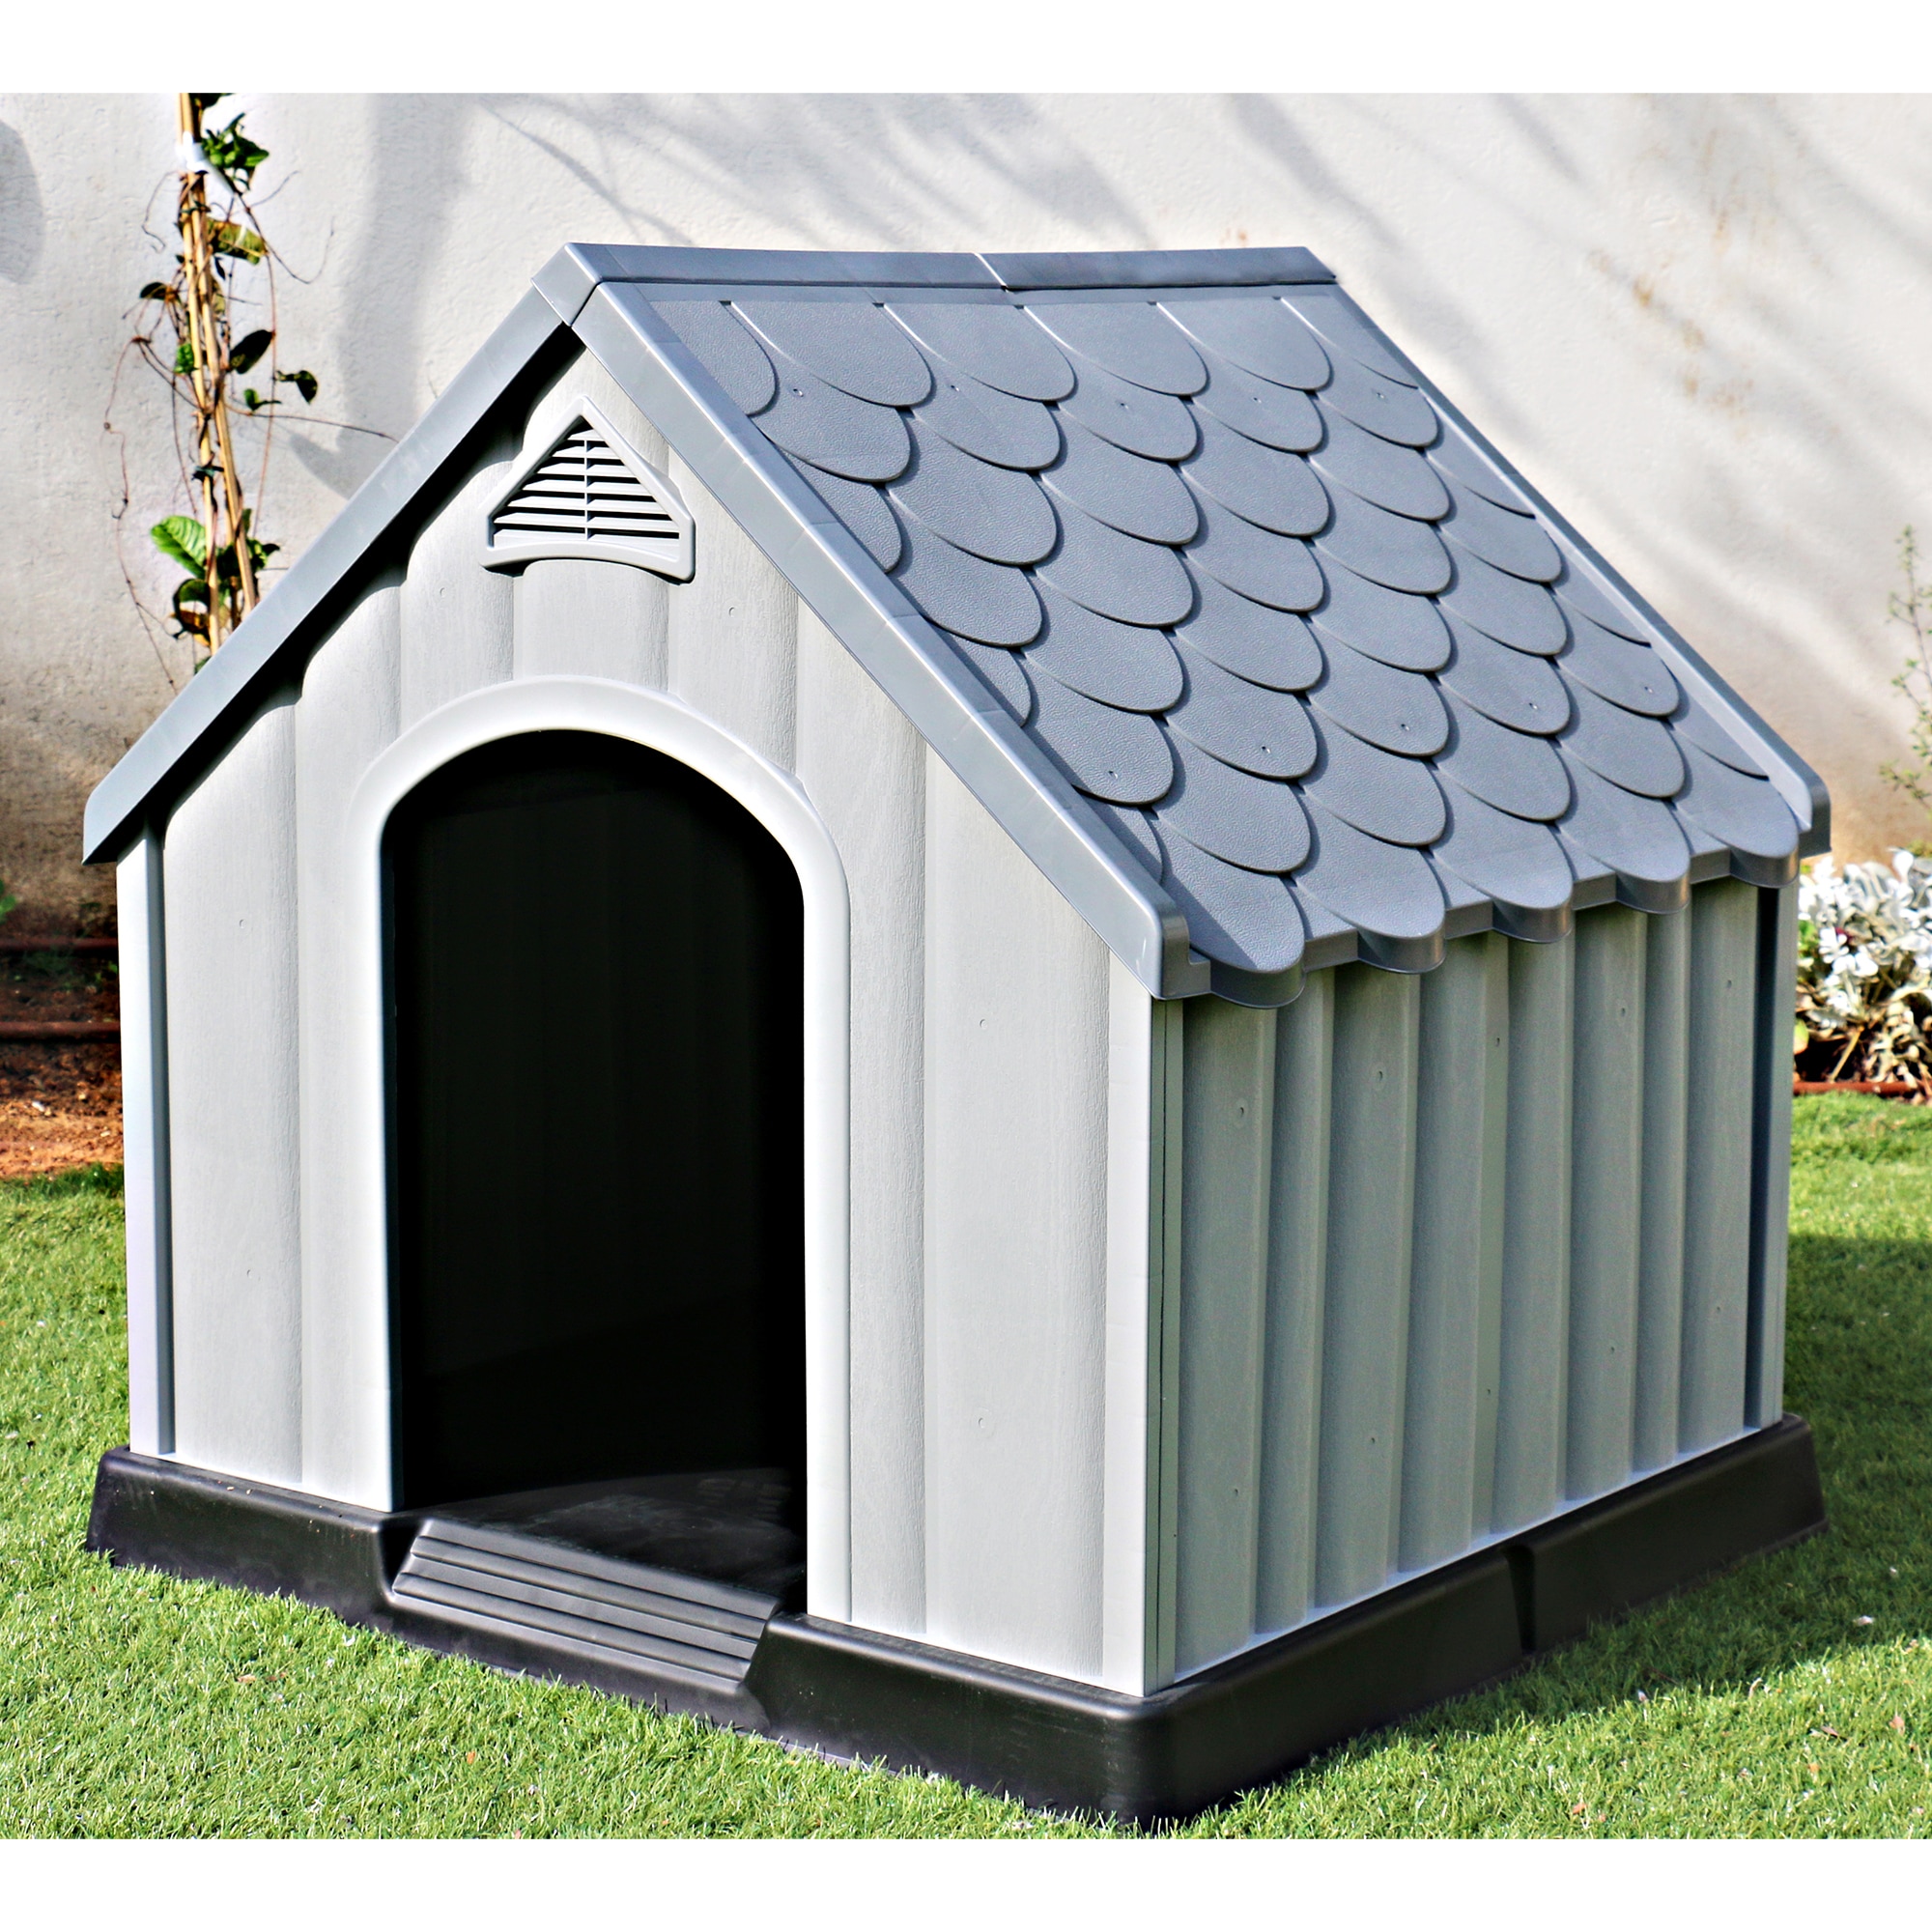 Pet Size Up To 100 lbs 03 Dog 36" x 44" Dog House Plans Gable Roof Med 